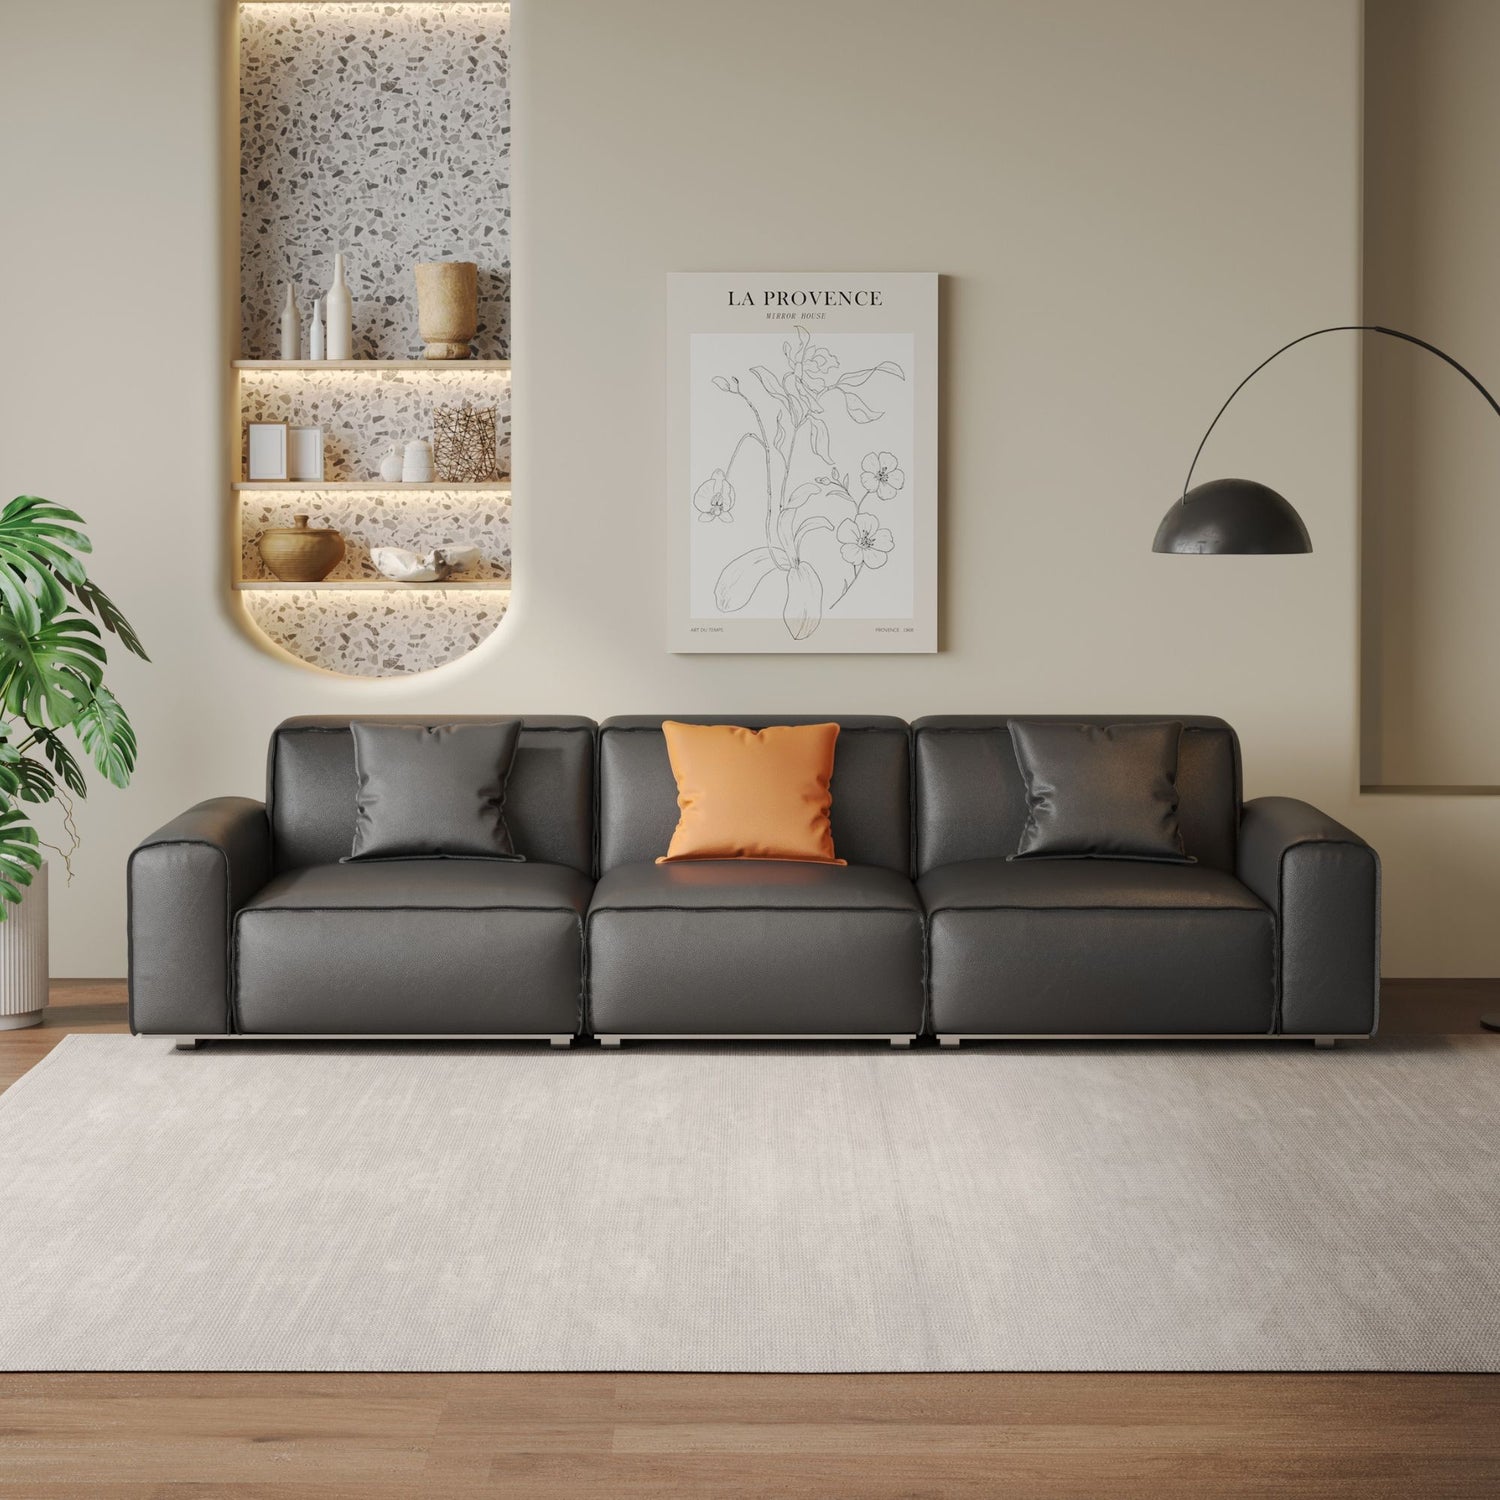 Colby black leather 3 seater sofa in living room setting